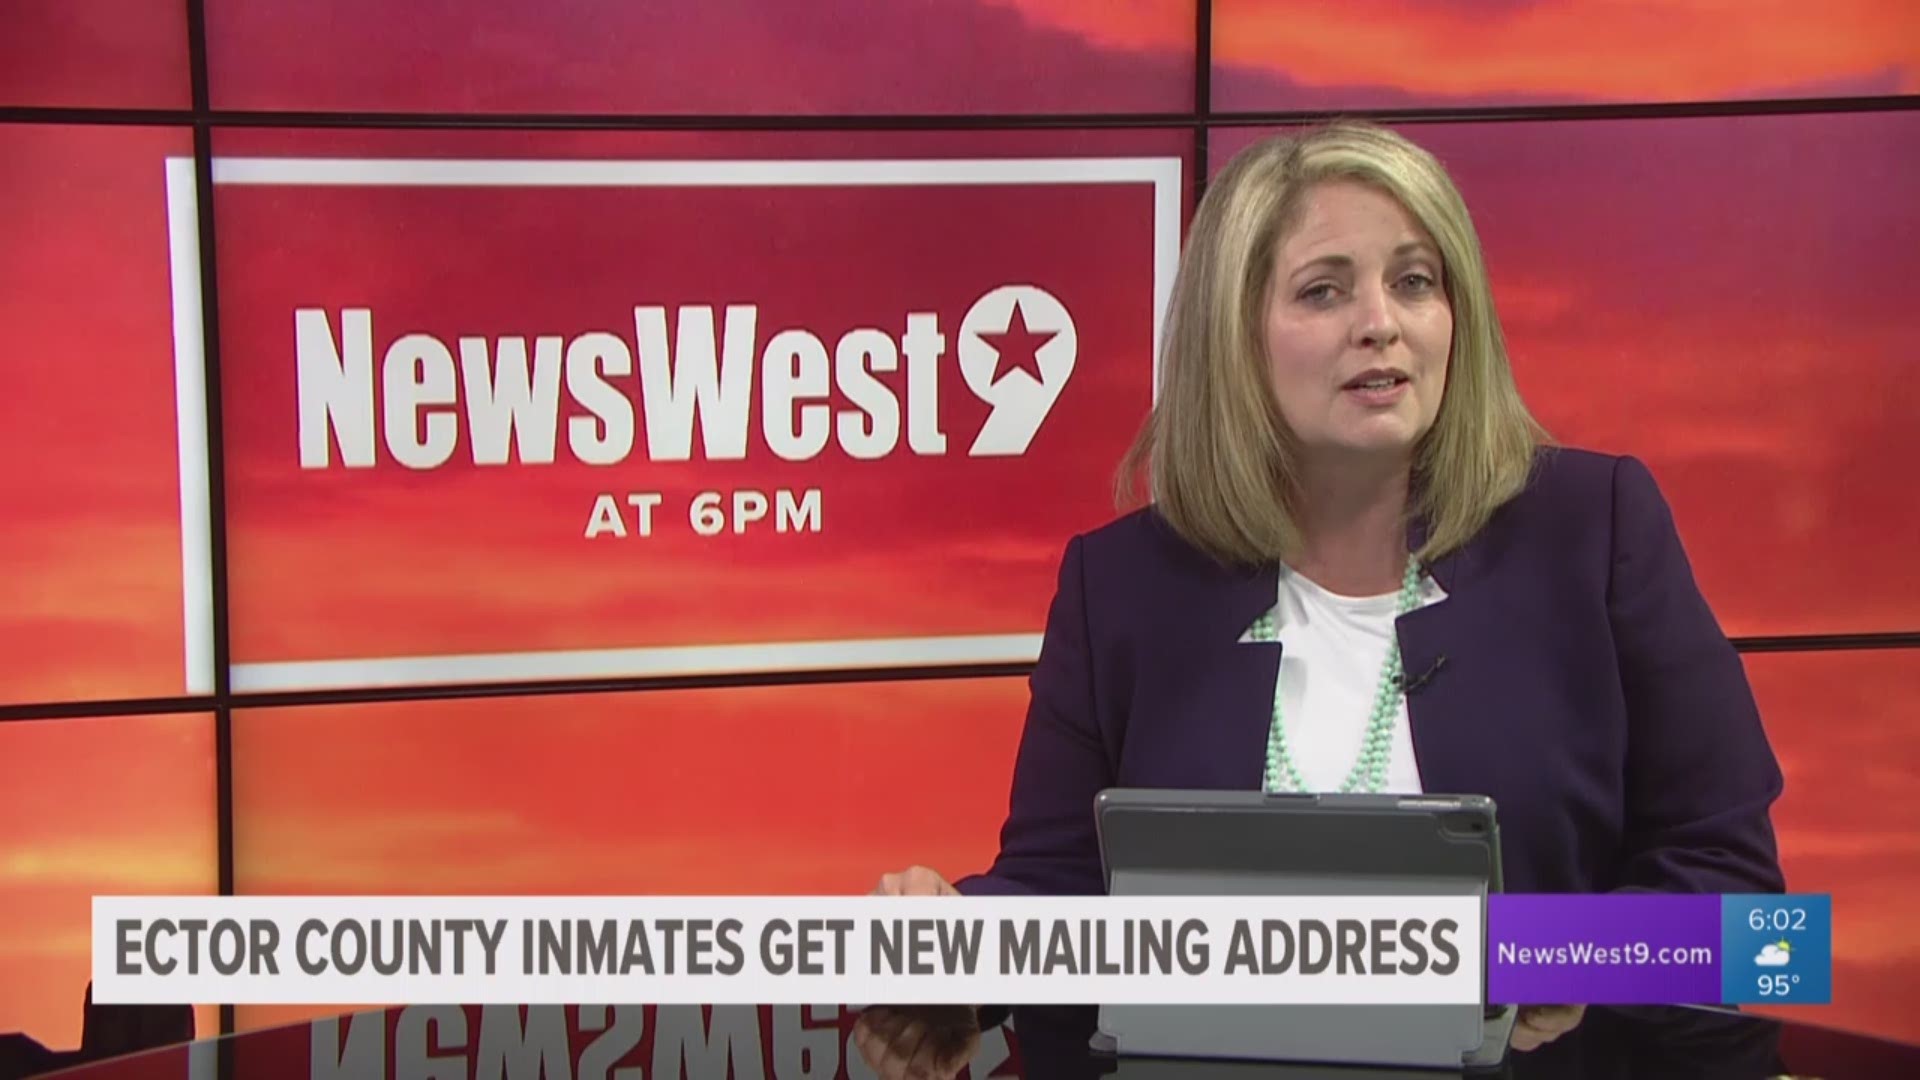 Ector County inmates get new mailing address in Florida.